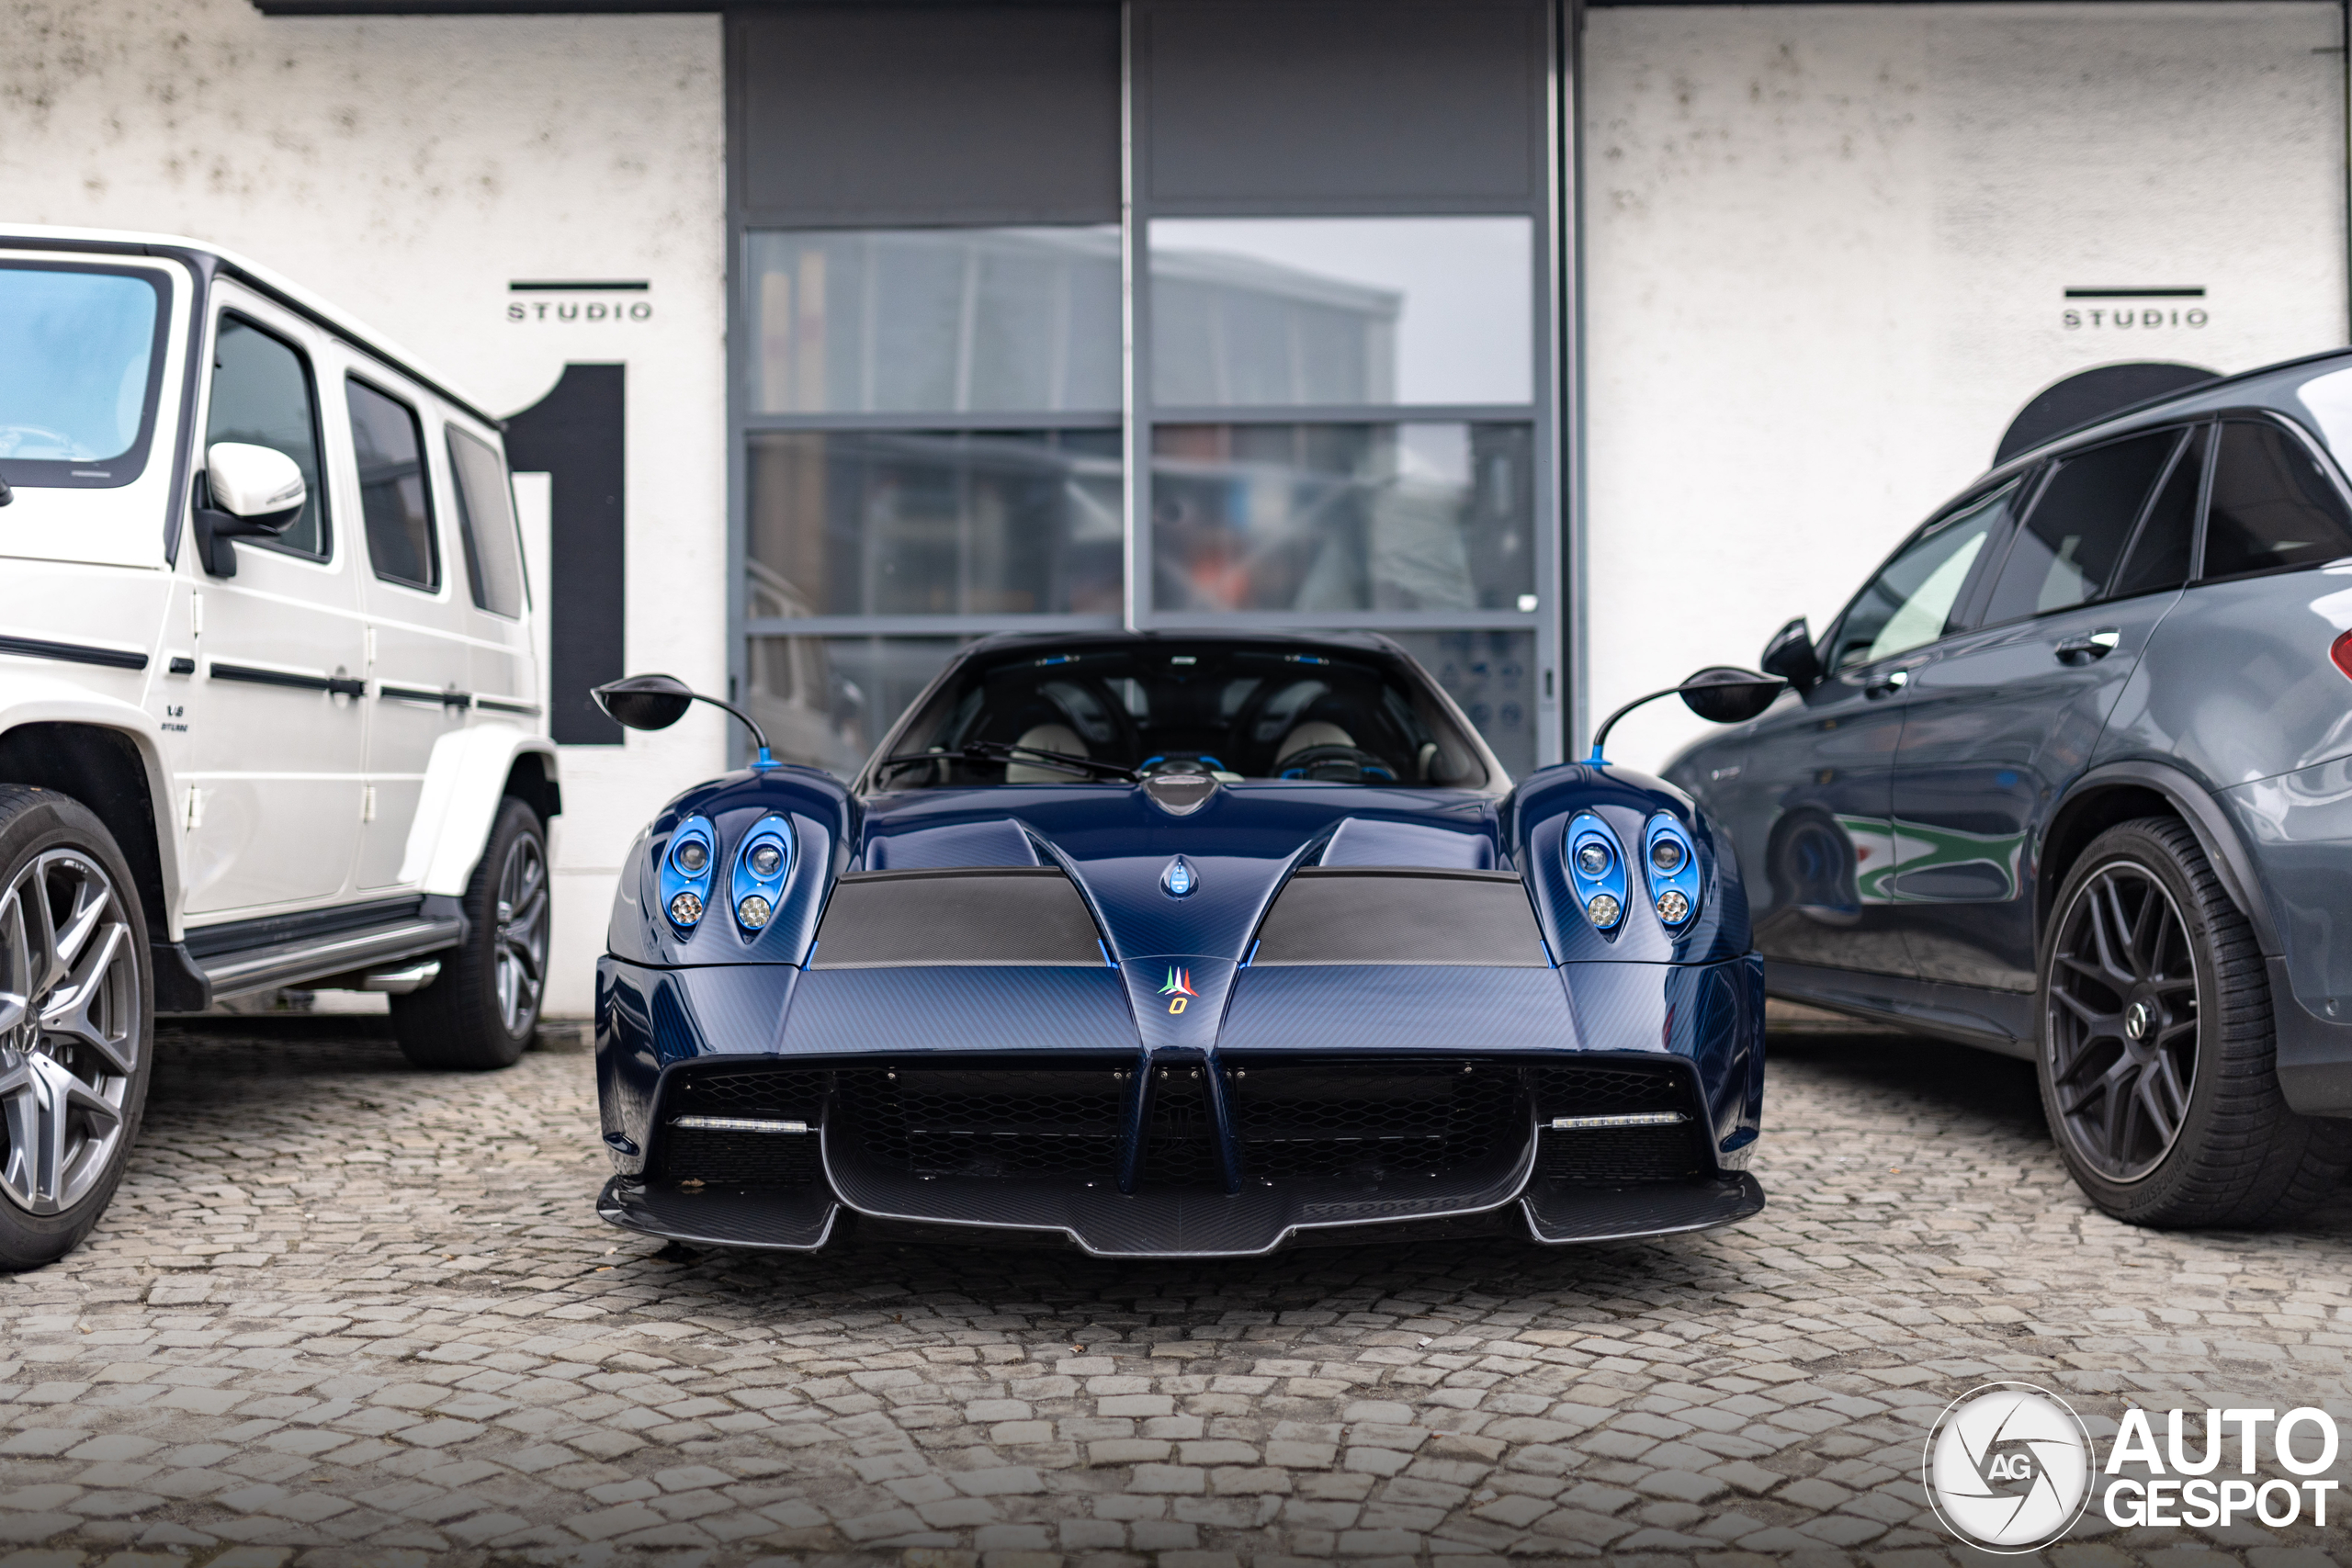 The Pagani Huayra Roadster Tricolore is full of beautiful details